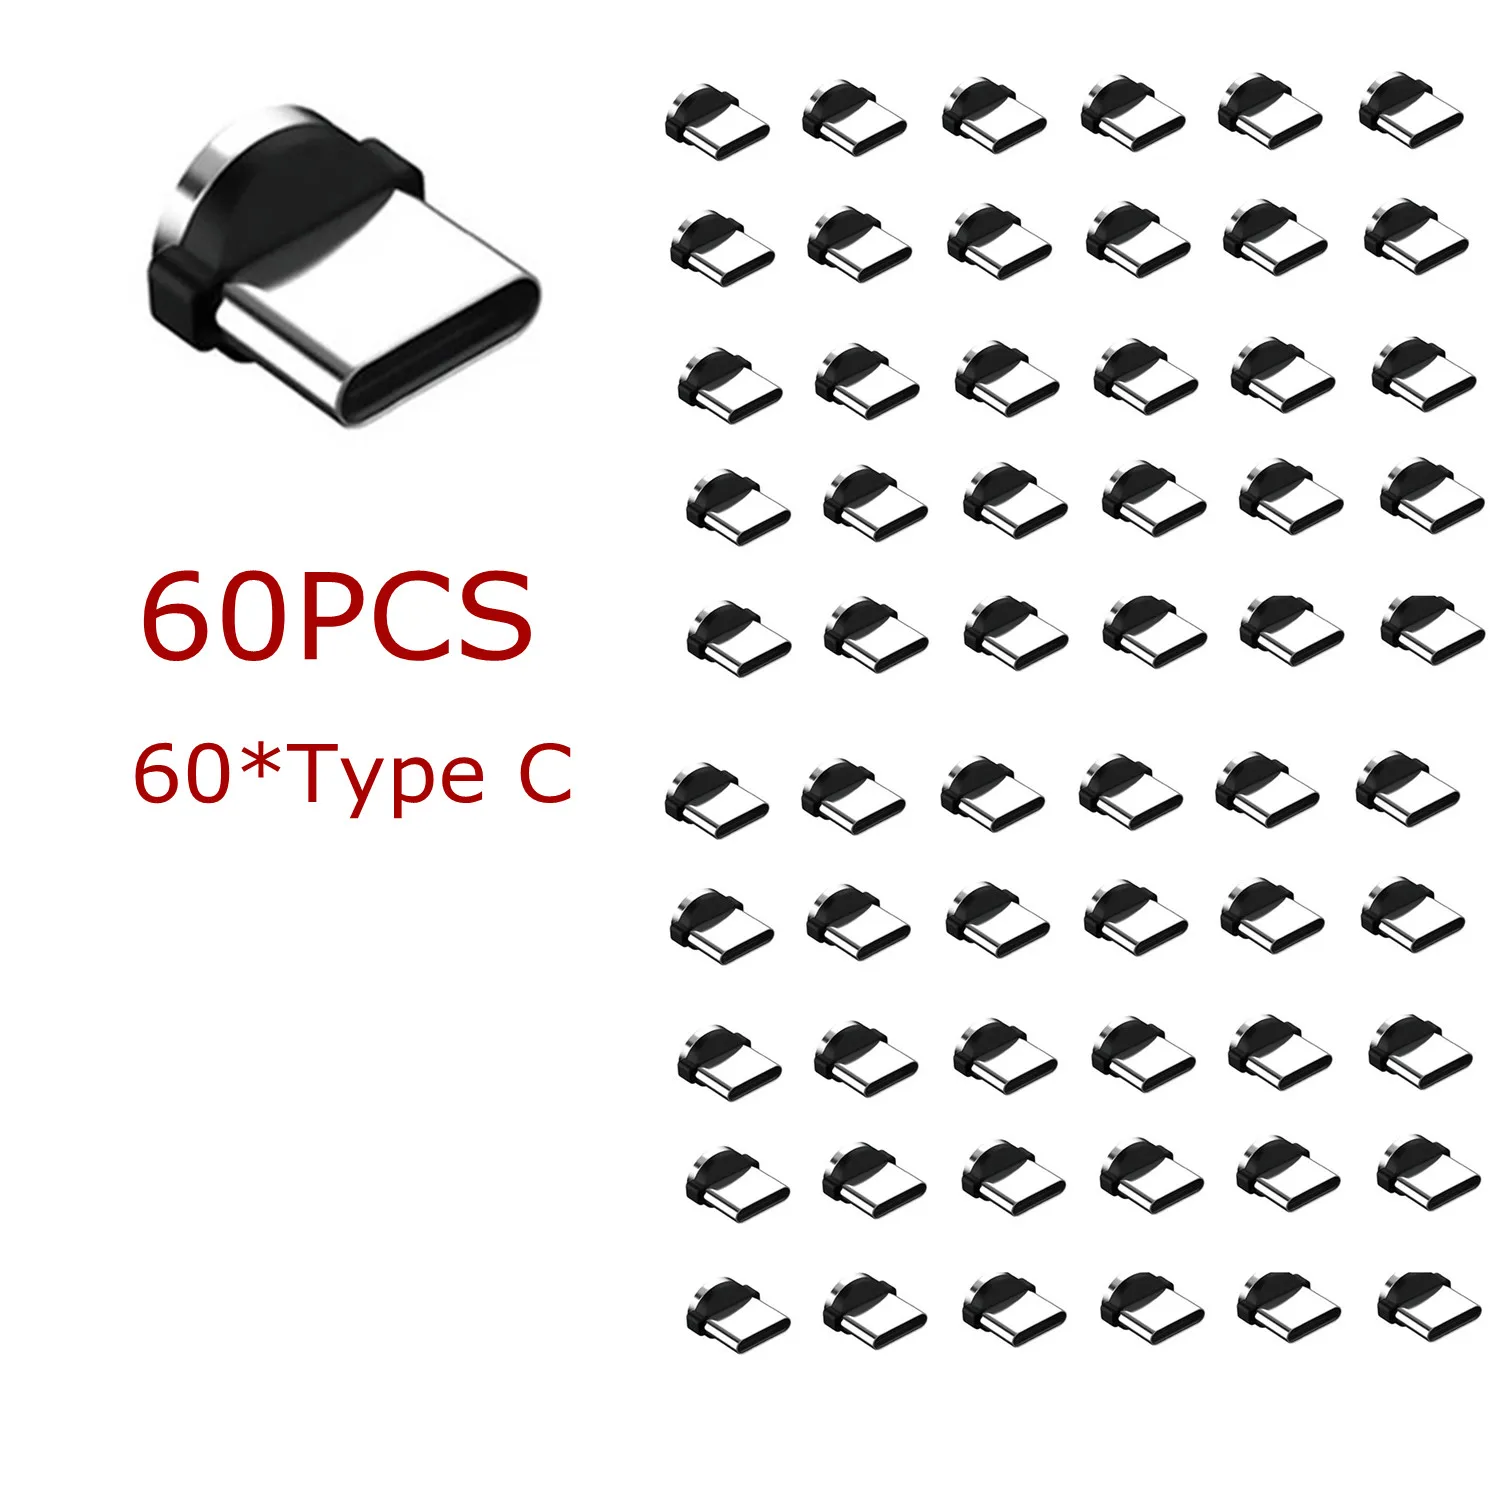 uslion 60 pcs magnetic tips for iphone samsung mobile phone replacement parts 3 in 1 plug micro converter cable adapter type c free global shipping